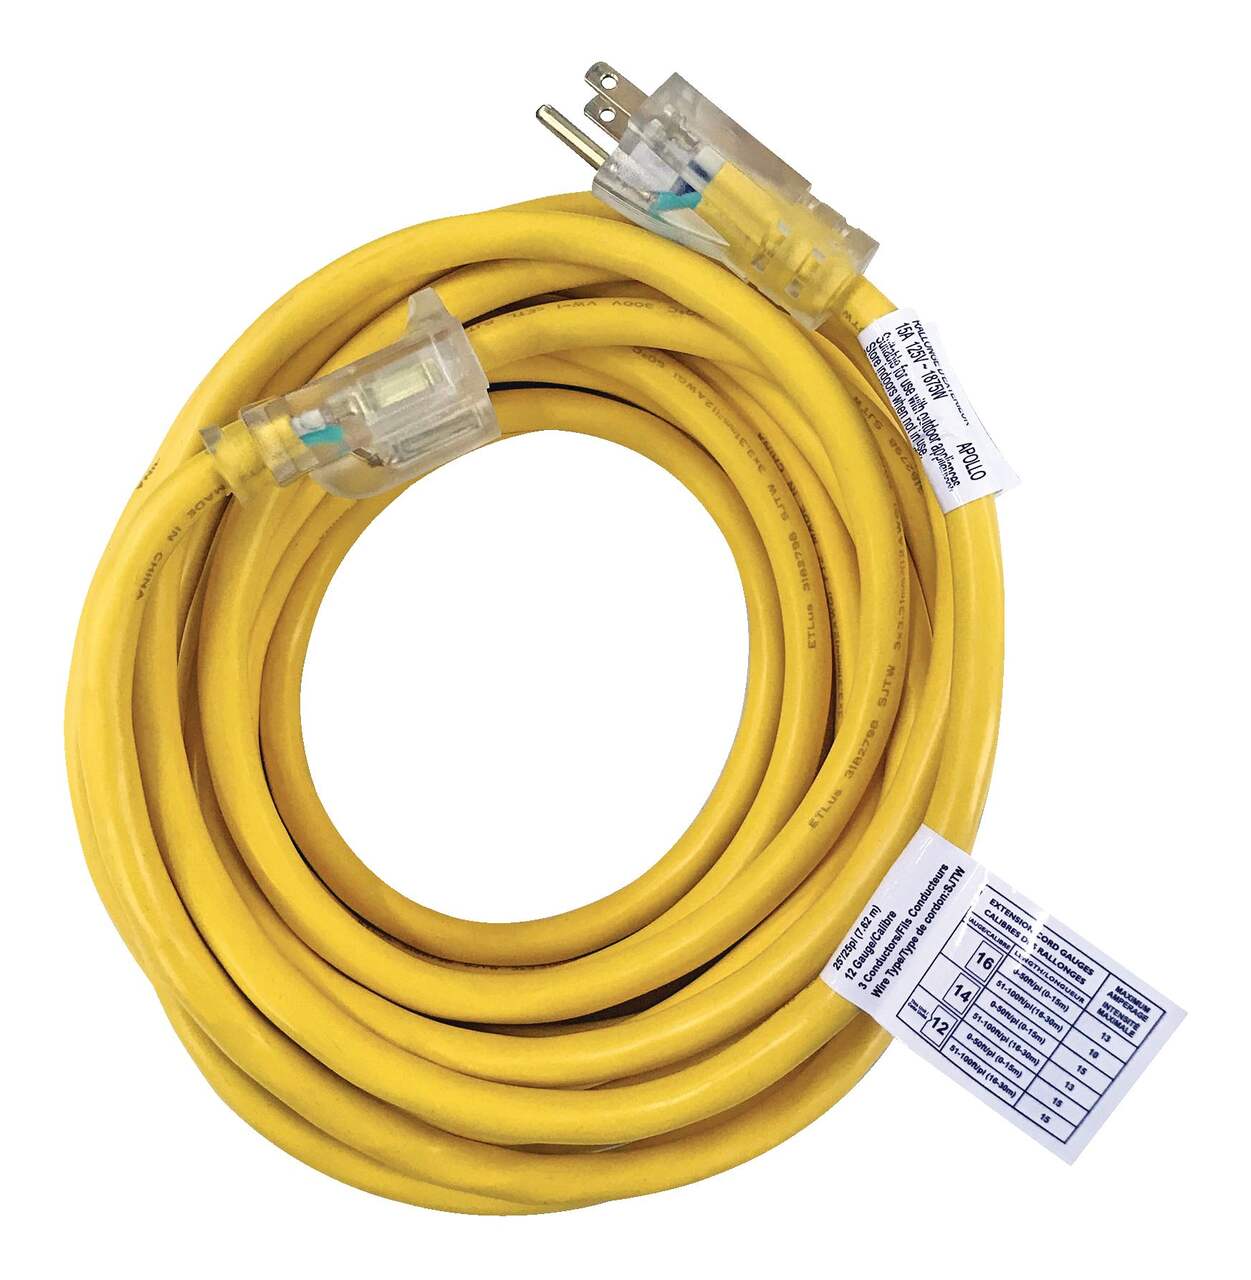 Mastercraft 12/3 Yellow Outdoor Extension Cord with 3 Grounded